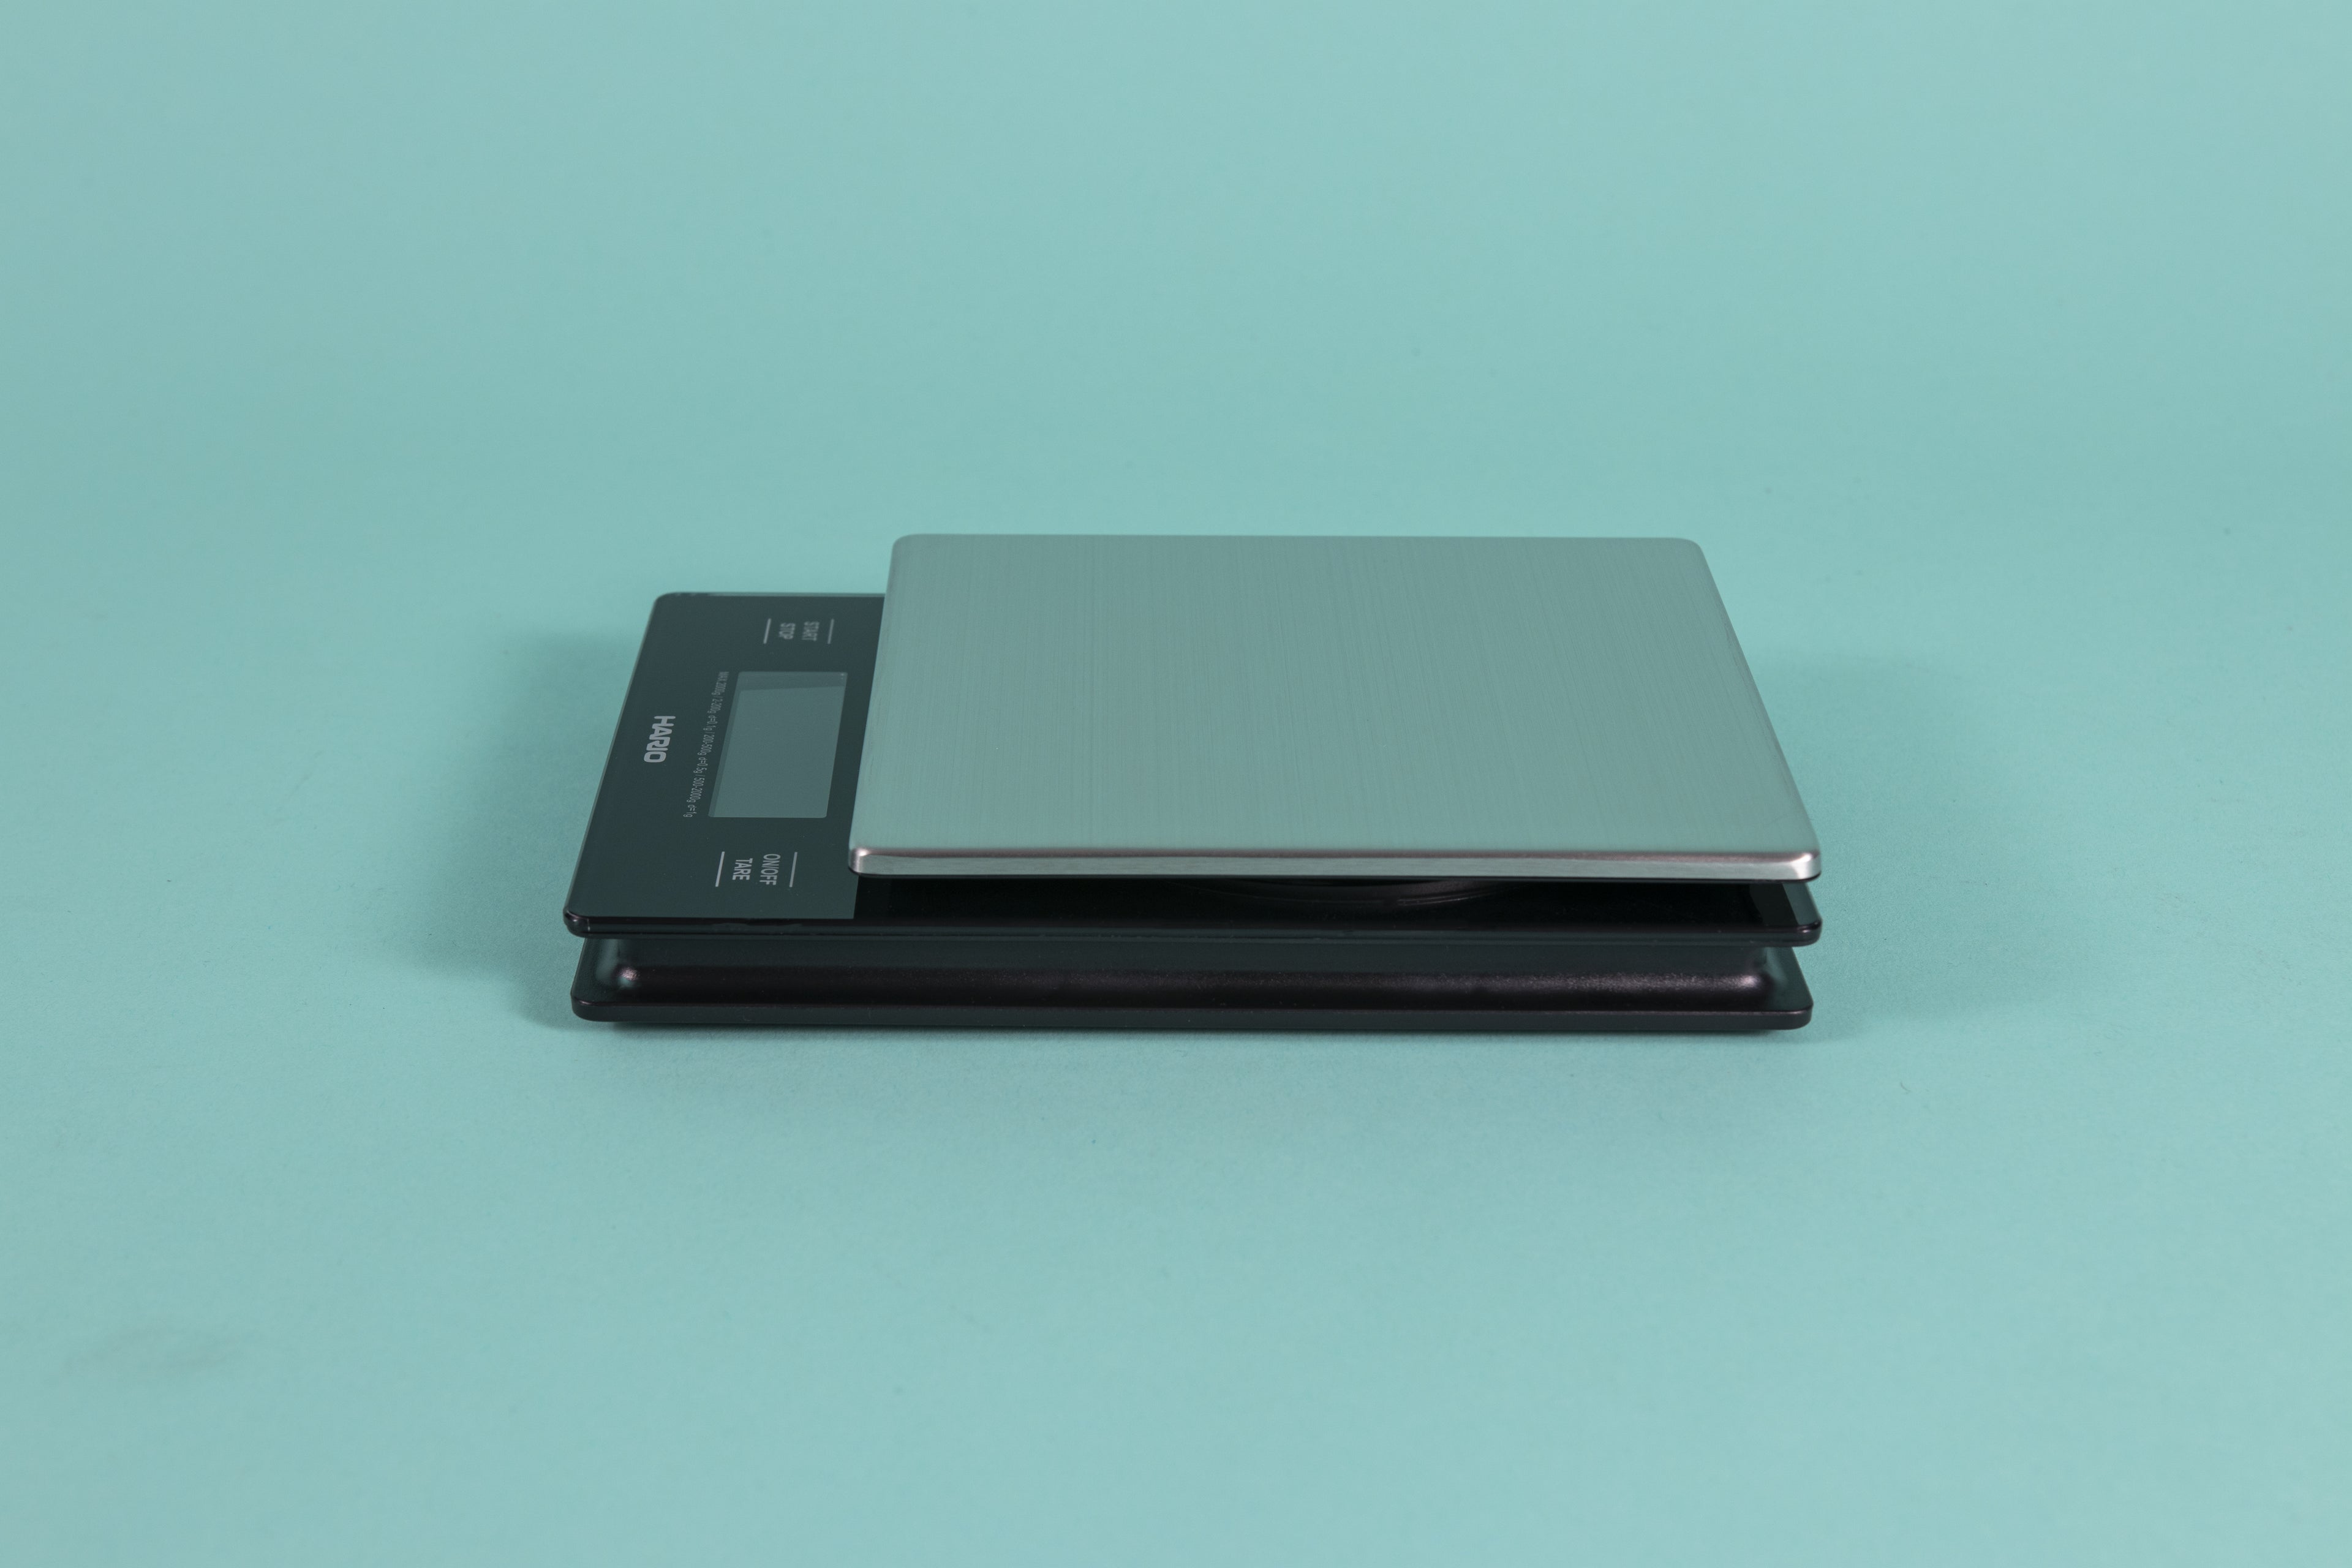 Black plastic scale with Digital LCD display and capacitive white text controls with a stainless steel weigh plate on a teal backdrop.